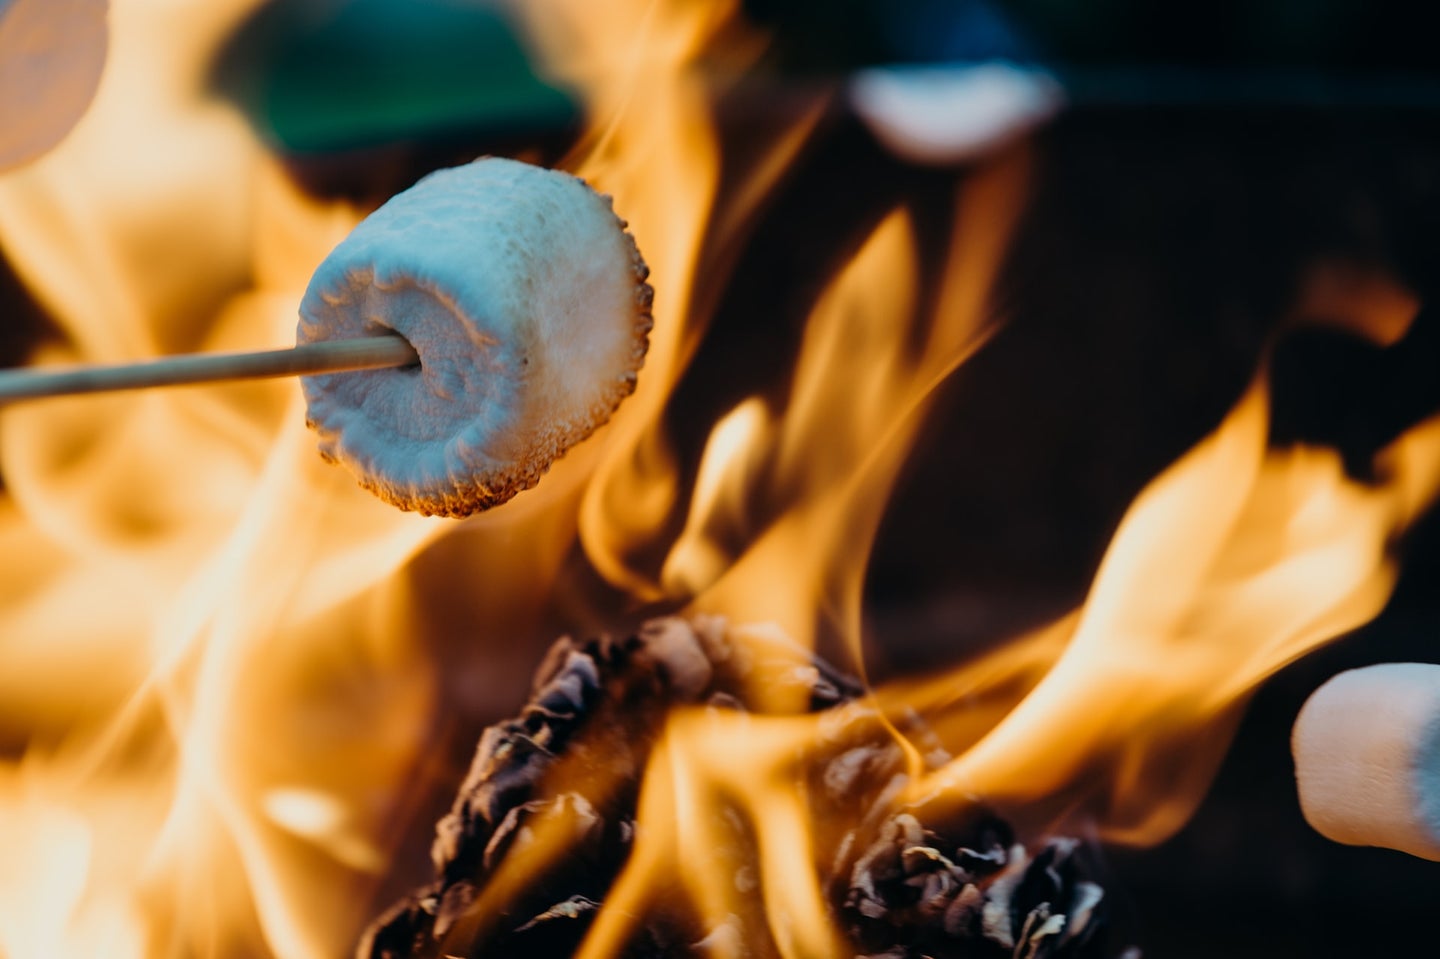 Marshmallow over fire to make s'mores and other smoky desserts